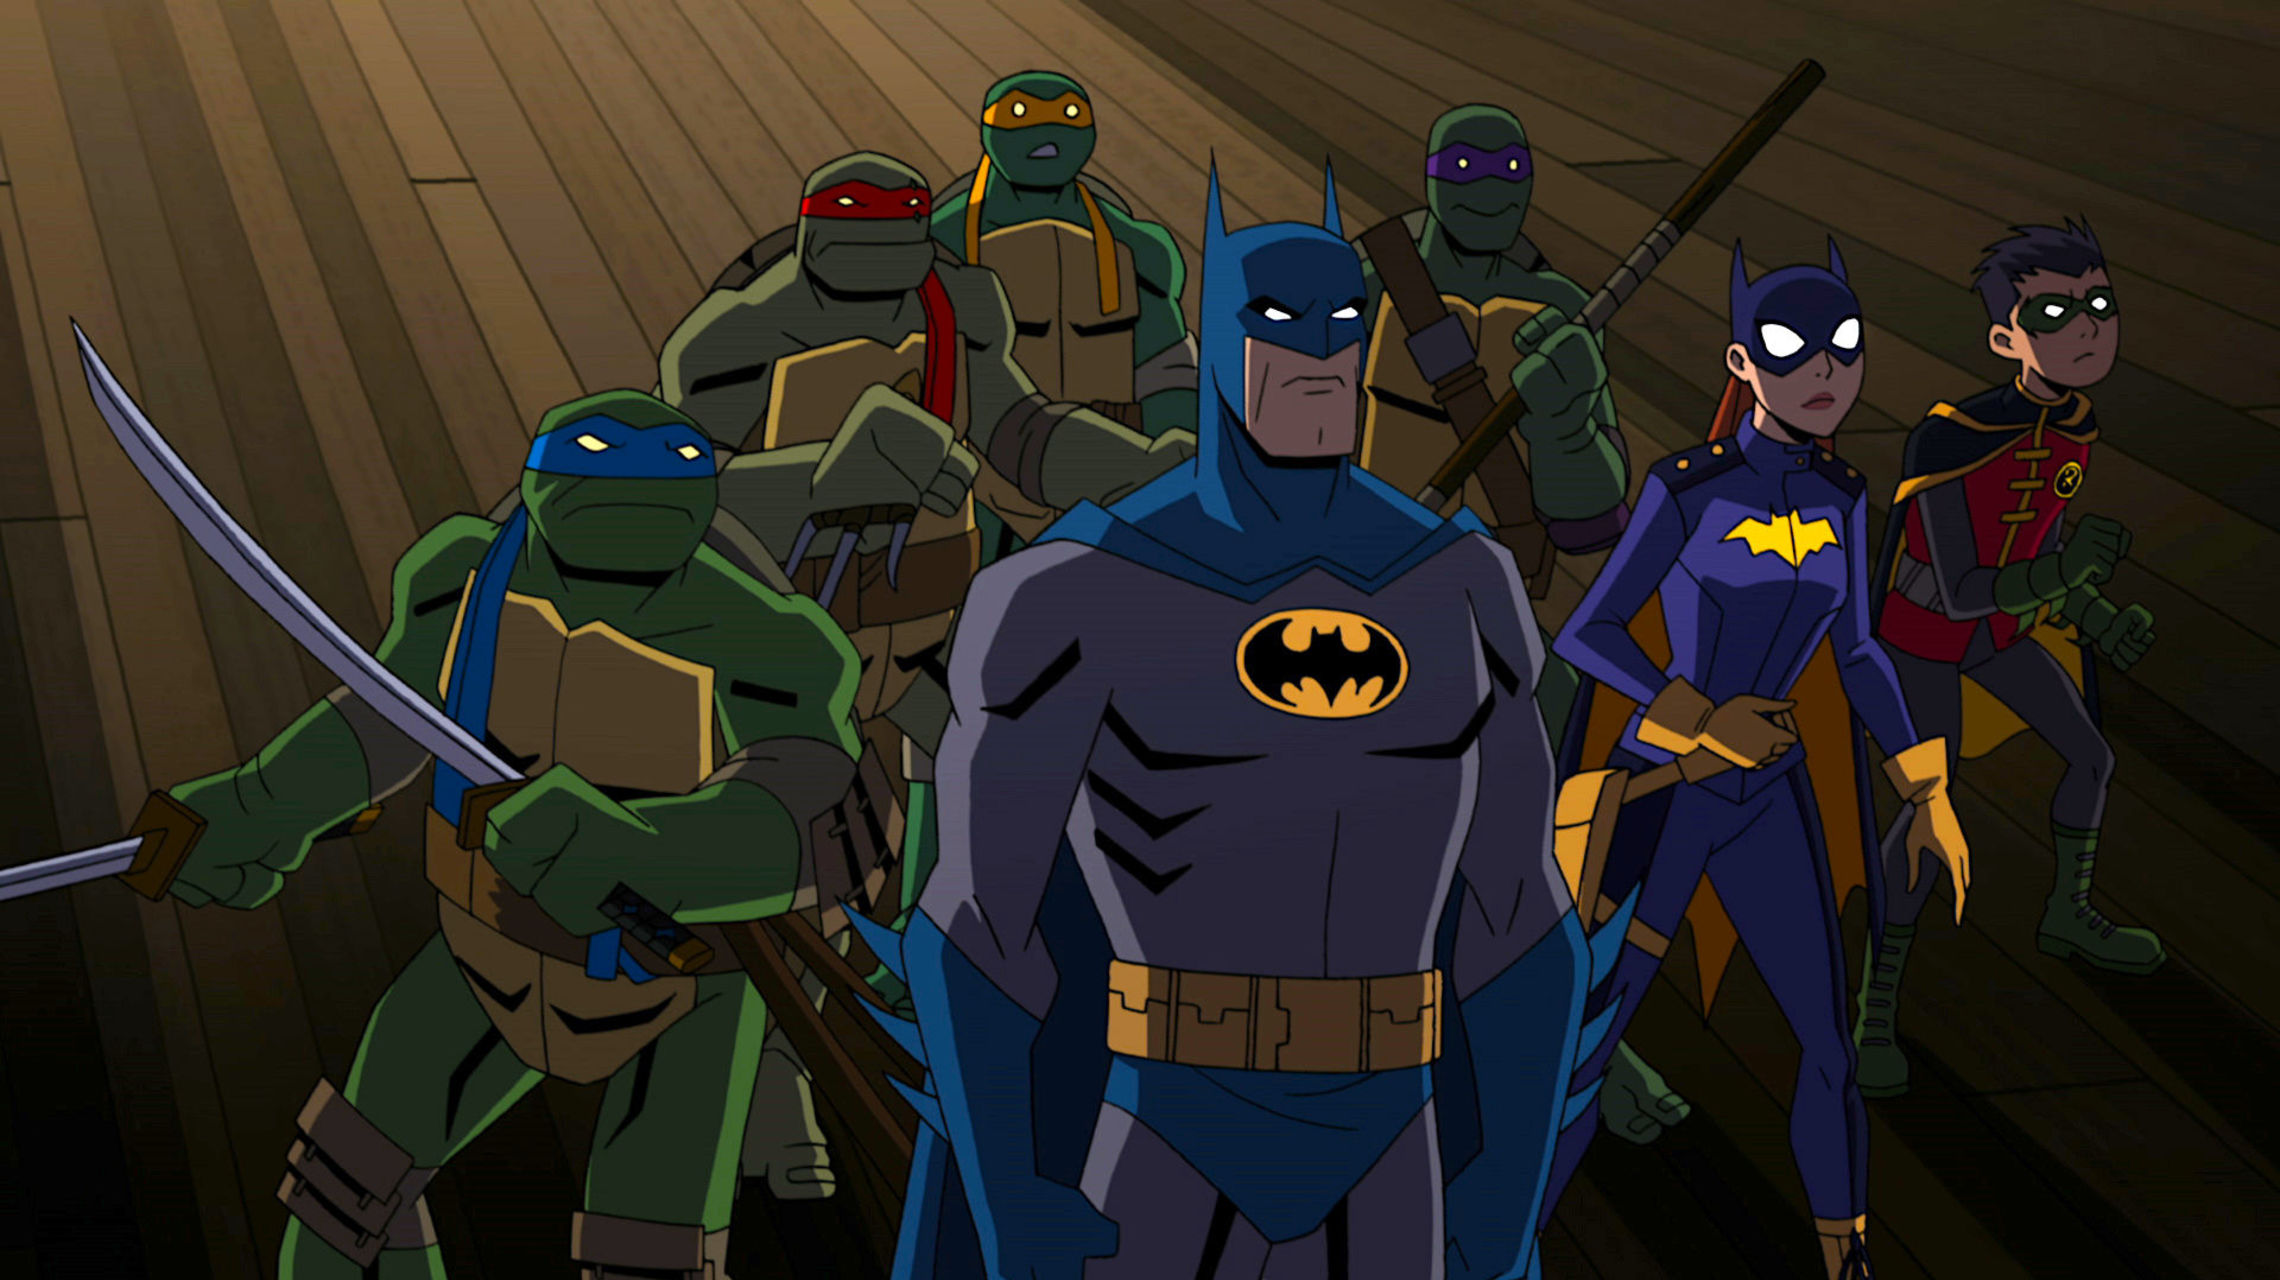 A Batman vs. Teenage Mutant Ninja Turtles movie has been announced. The Dark Knight and the Ninja Turtles will be teaming up for an epic crossover movie.